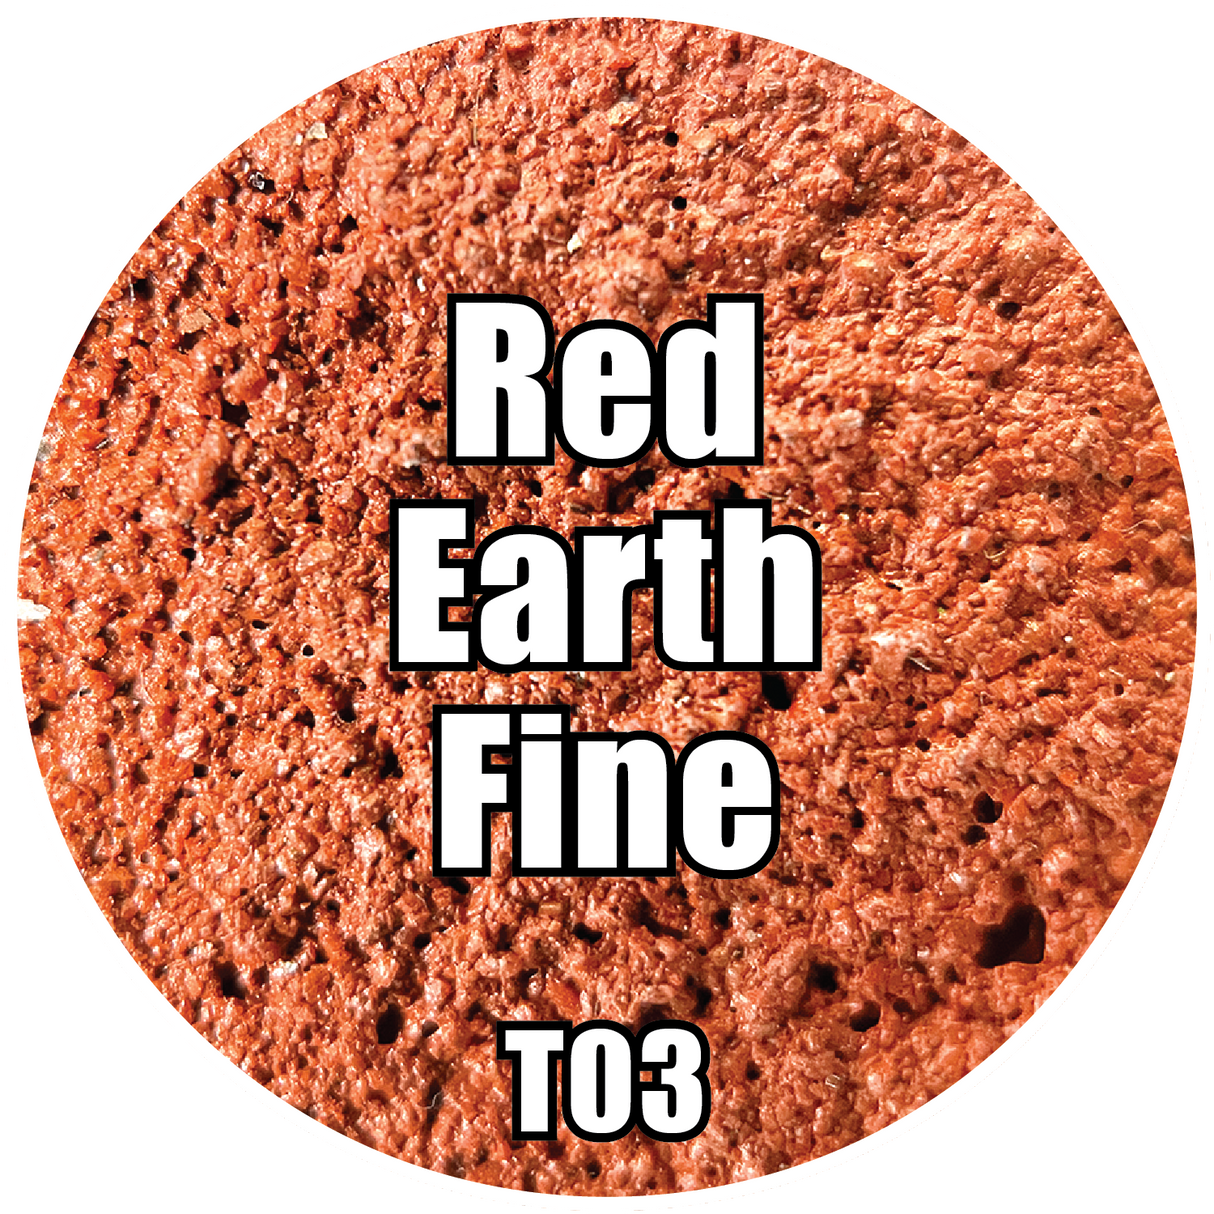 Basing Textures: Red Earth - Fine 120mL